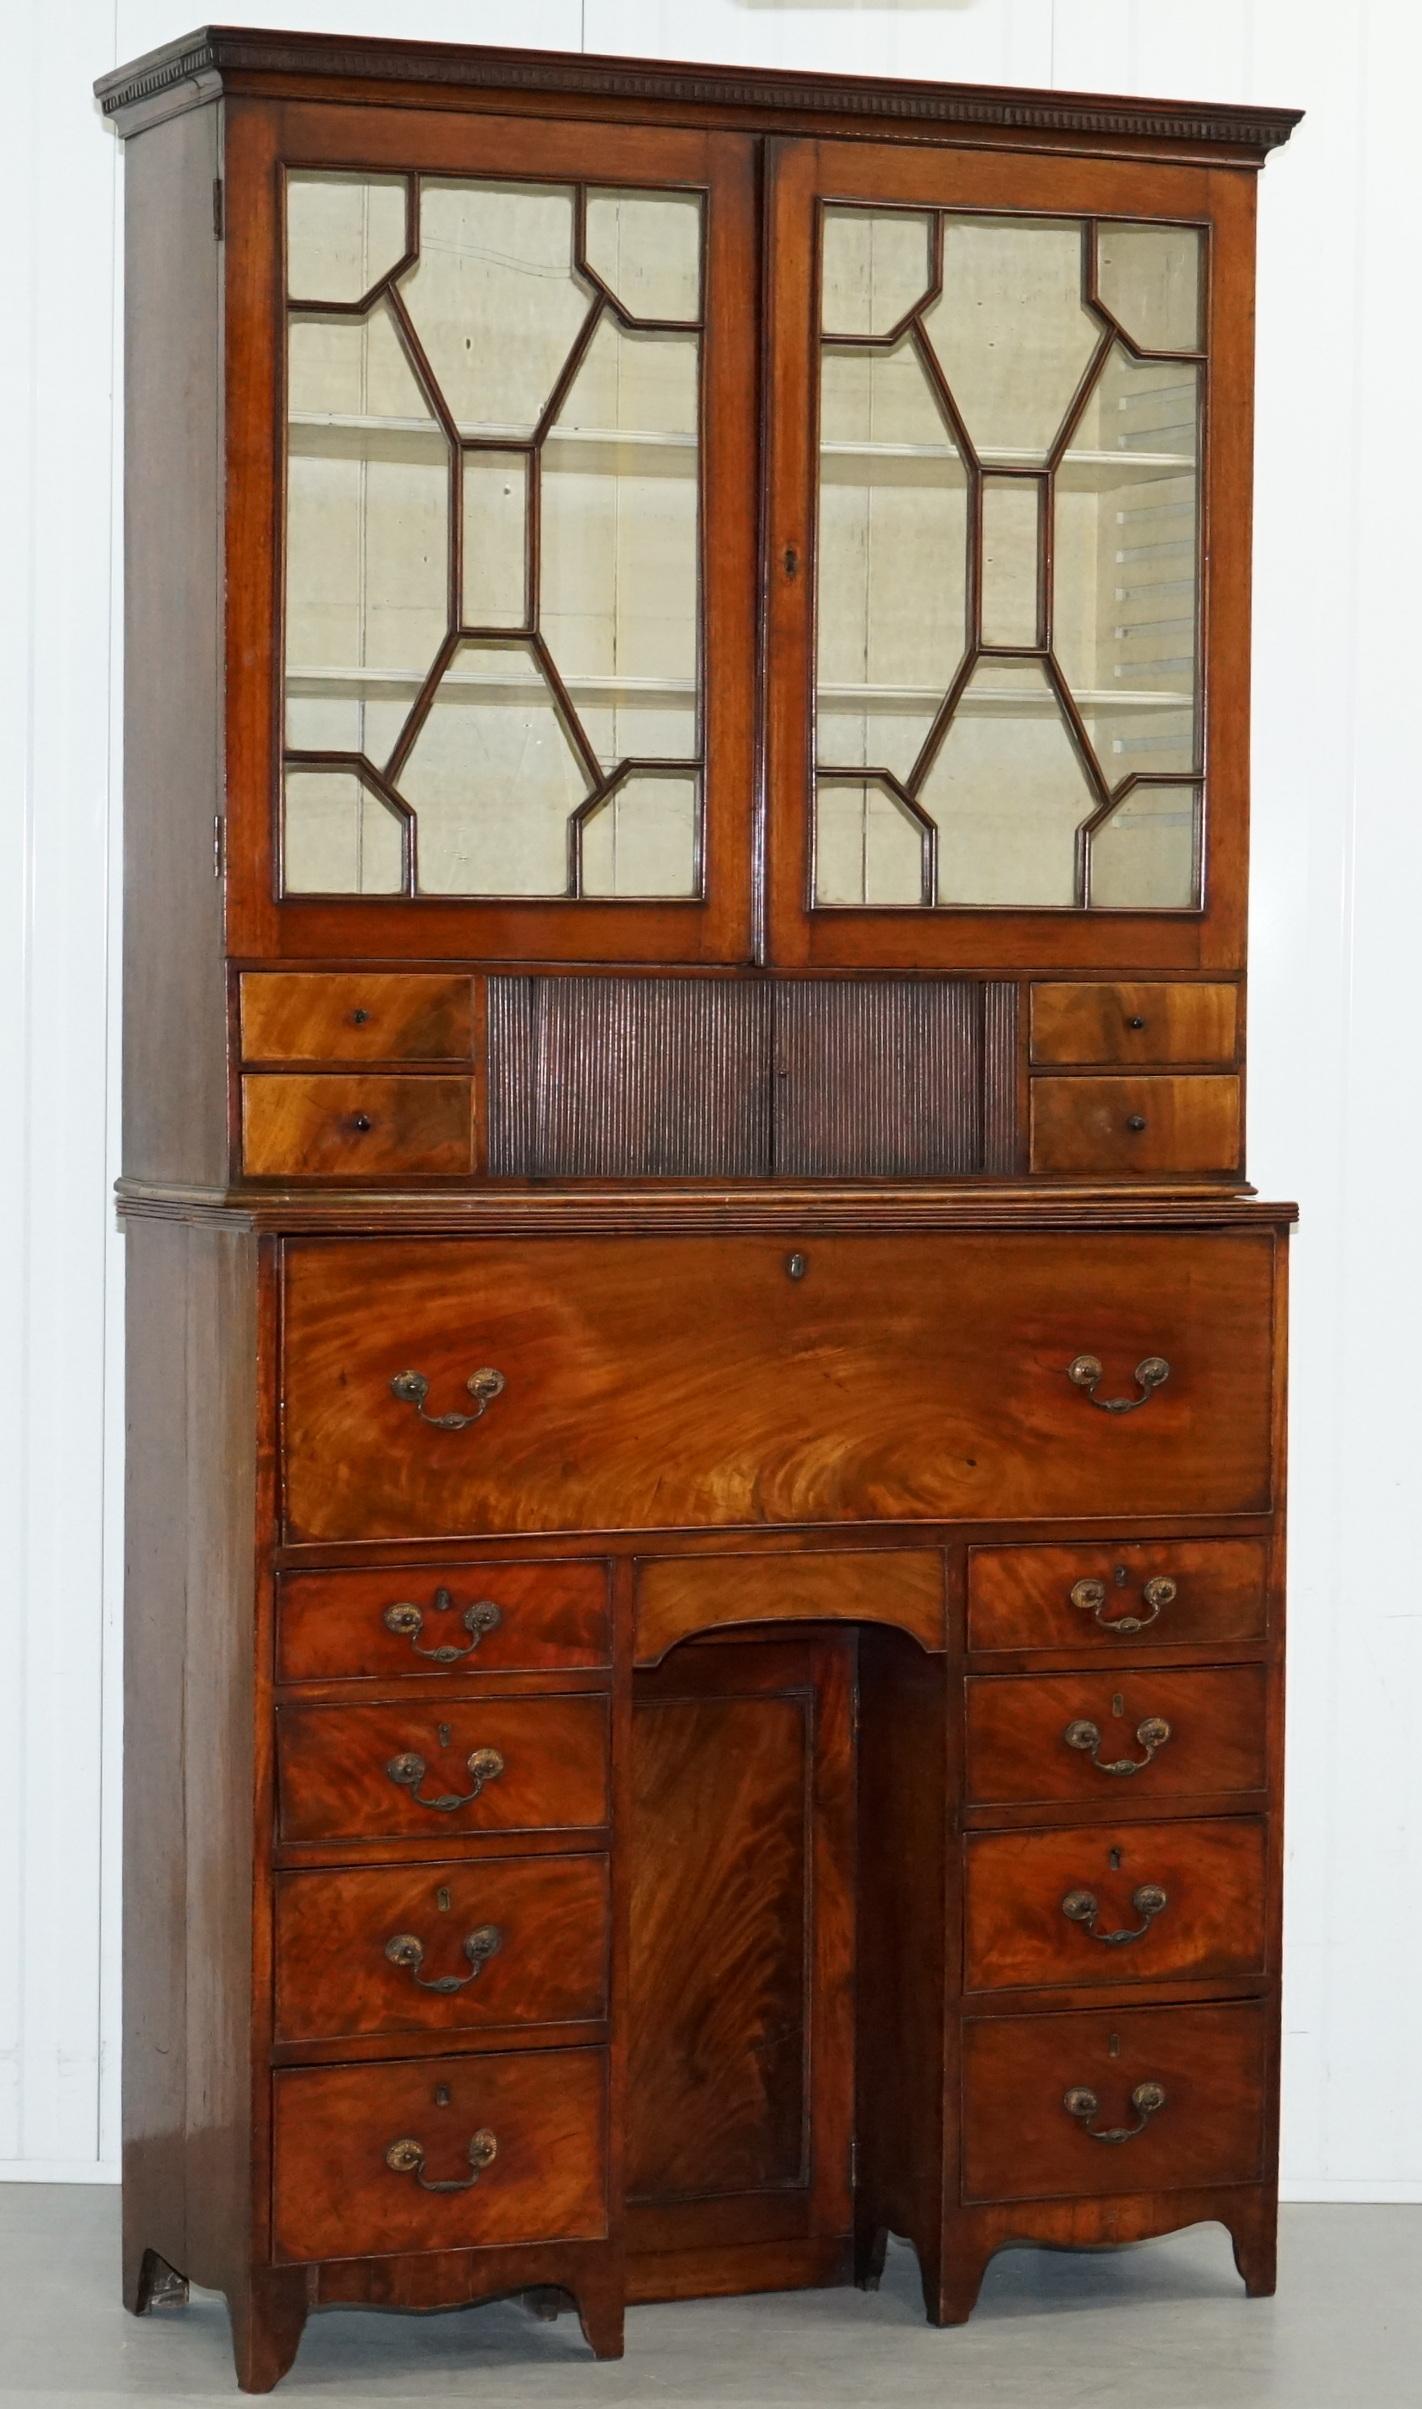 We are delighted to offer for sale this very rare George III circa 1780 Secrataire bookcase bureau with 33 drawers, cupboards and shelves

This piece is special, it has all the elements you could hope to find in a George III piece and more, the